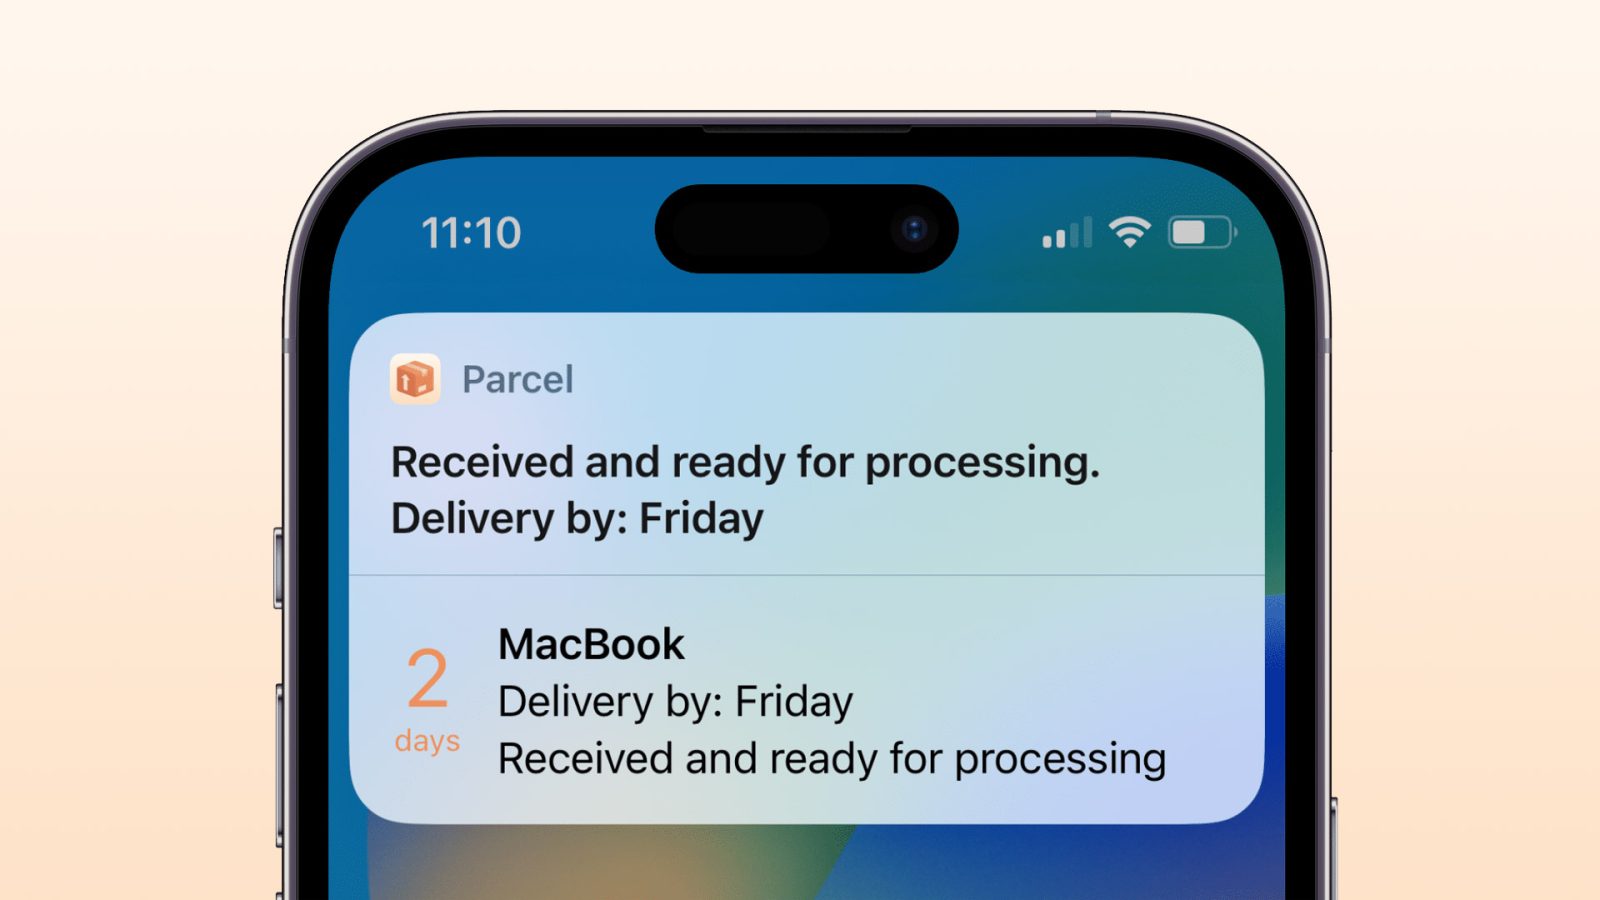 Parcel tracking app updated with Siri commands to get shipping status